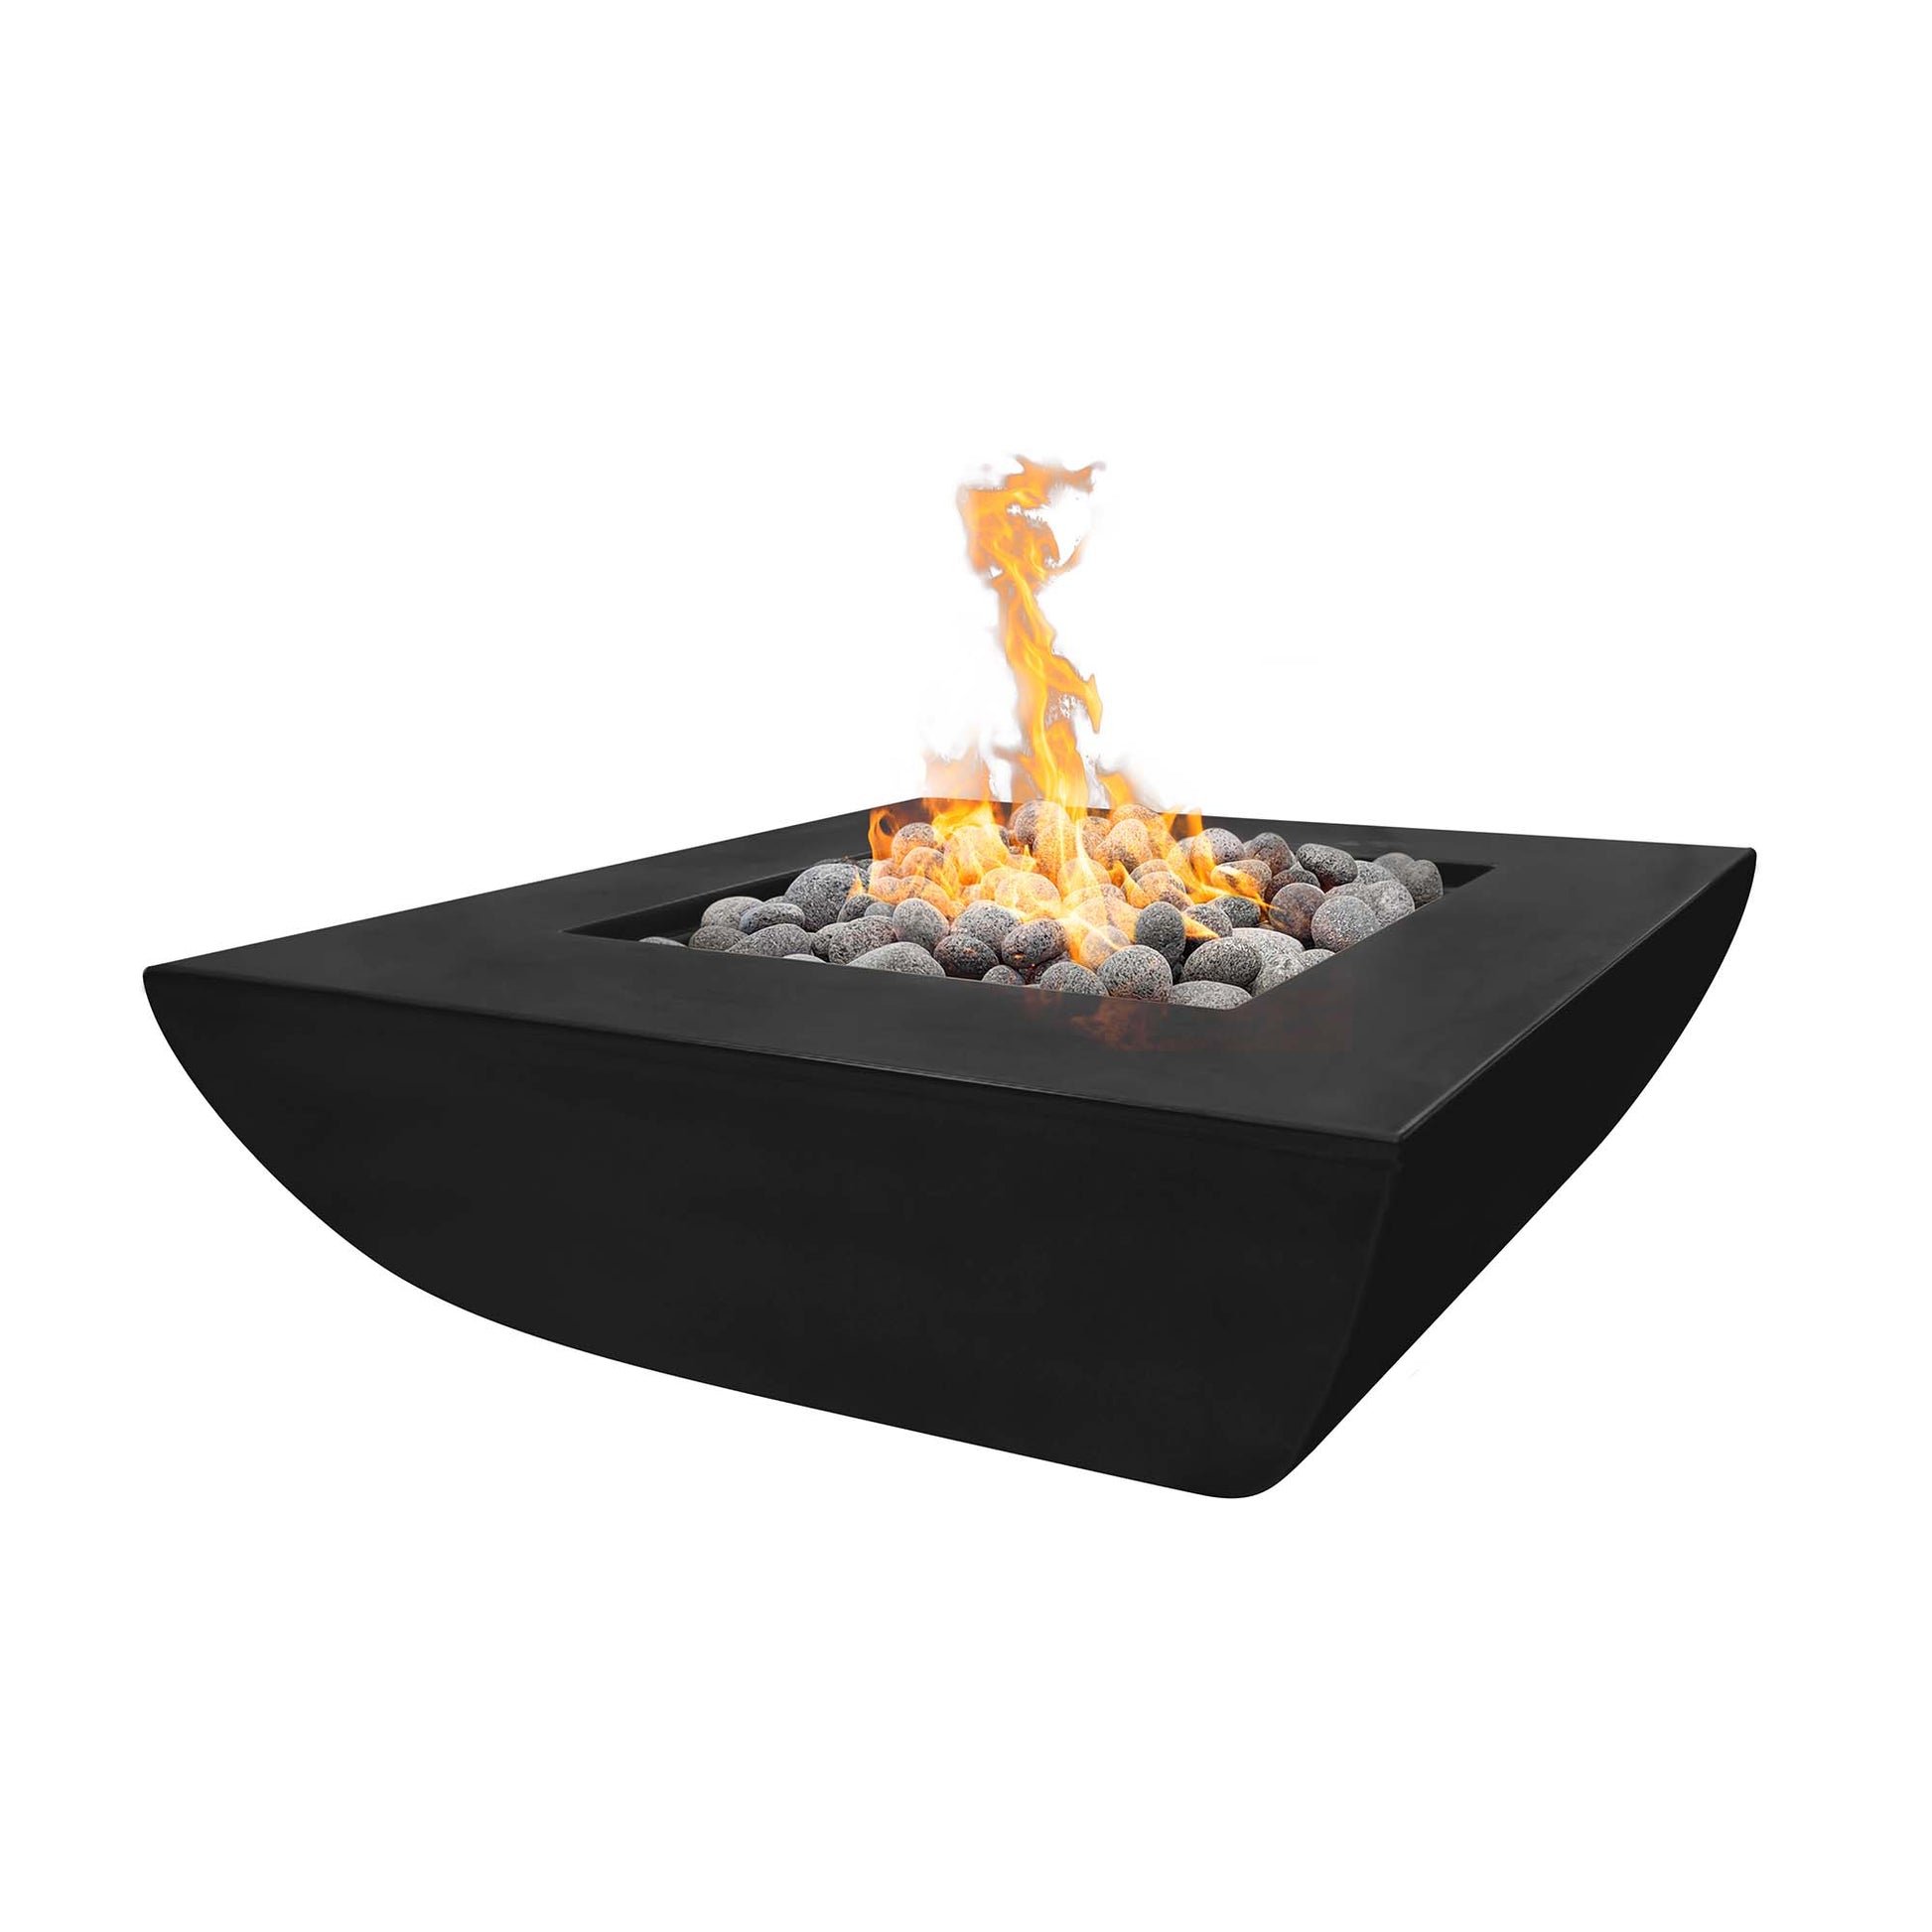 The Outdoor Plus Square Avalon 42" Metallic Copper GFRC Concrete Natural Gas Fire Pit with Match Lit with Flame Sense Ignition